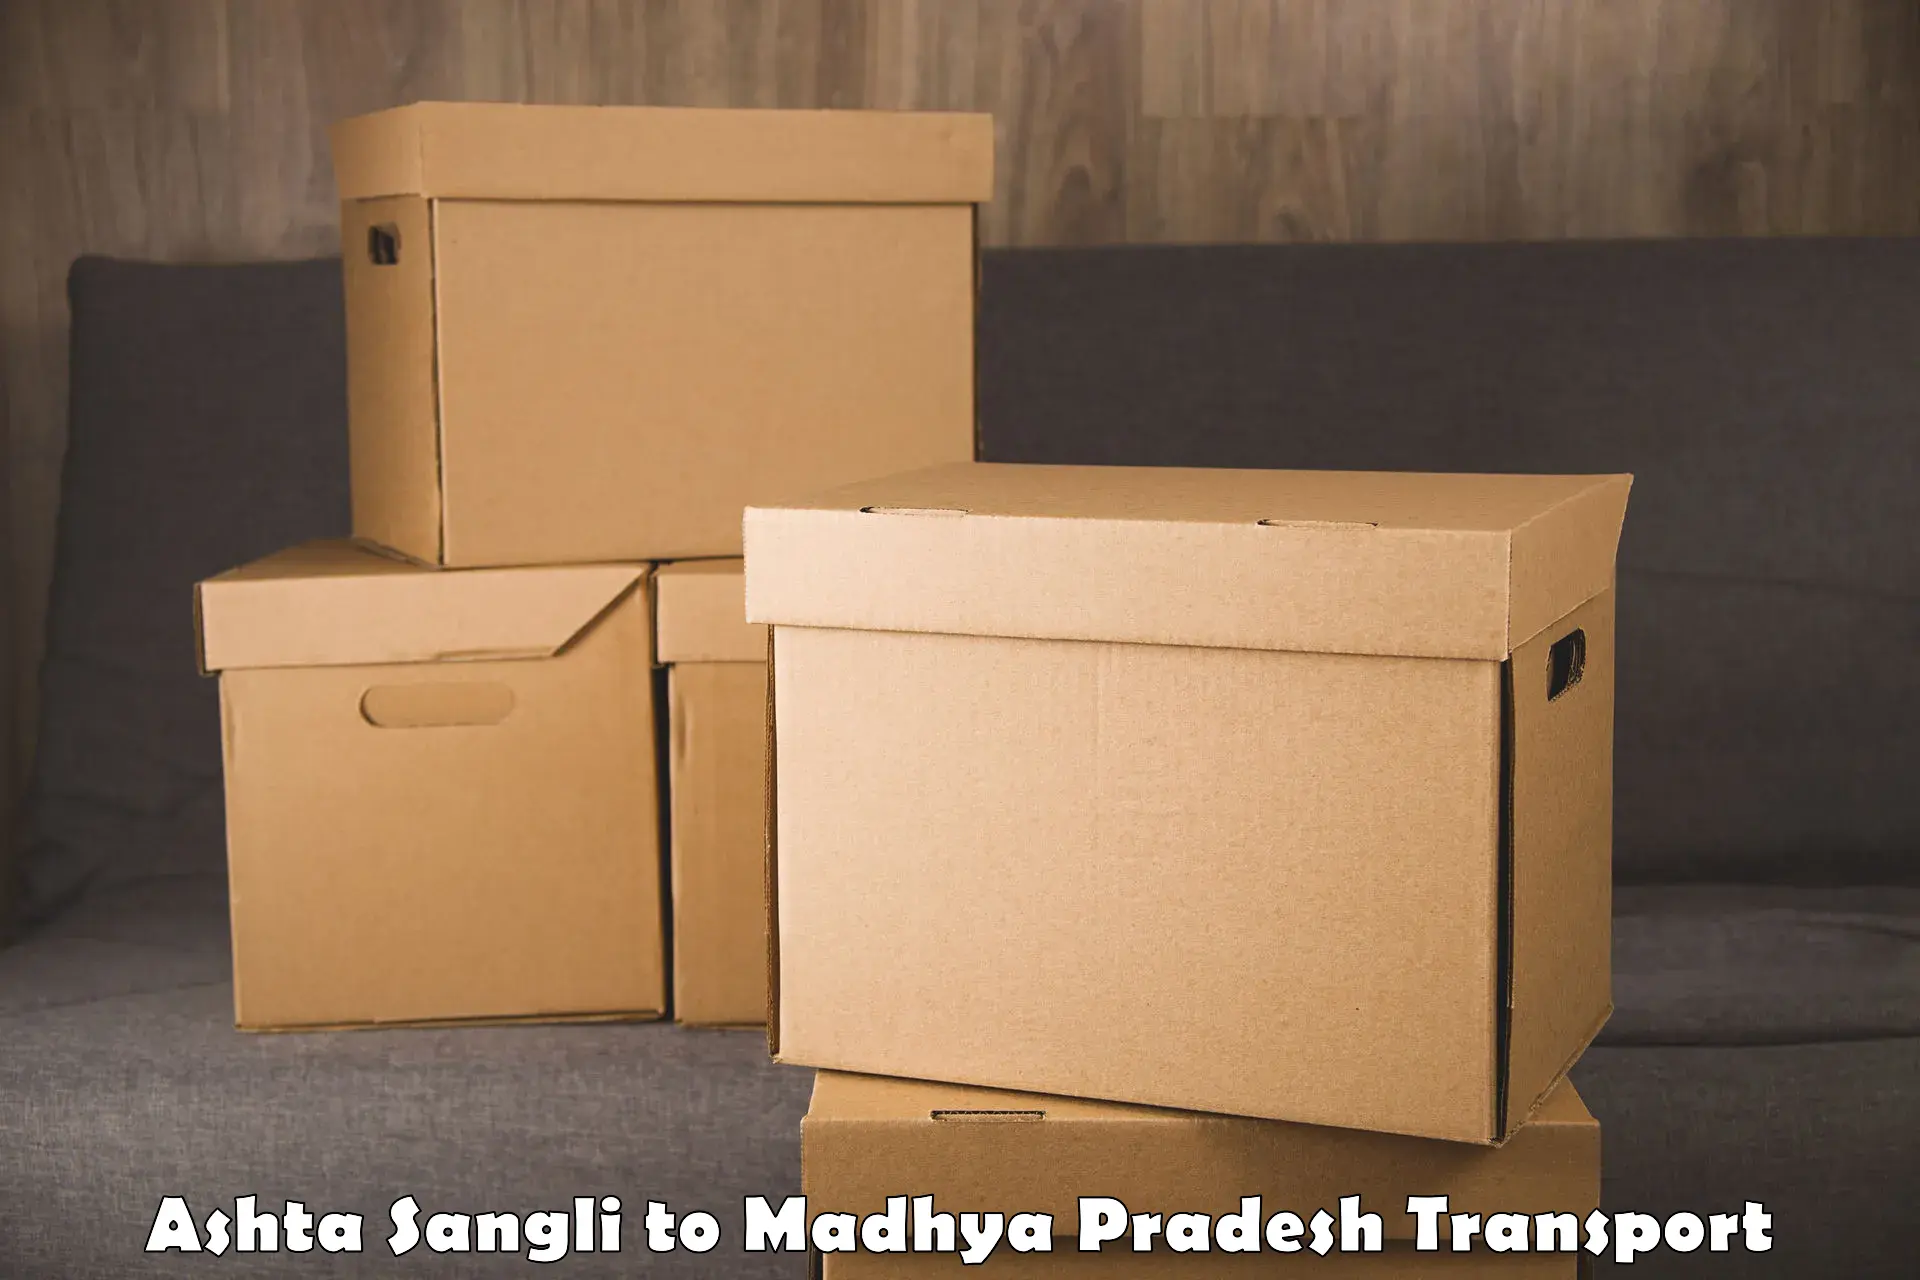 Container transport service Ashta Sangli to IIIT Bhopal